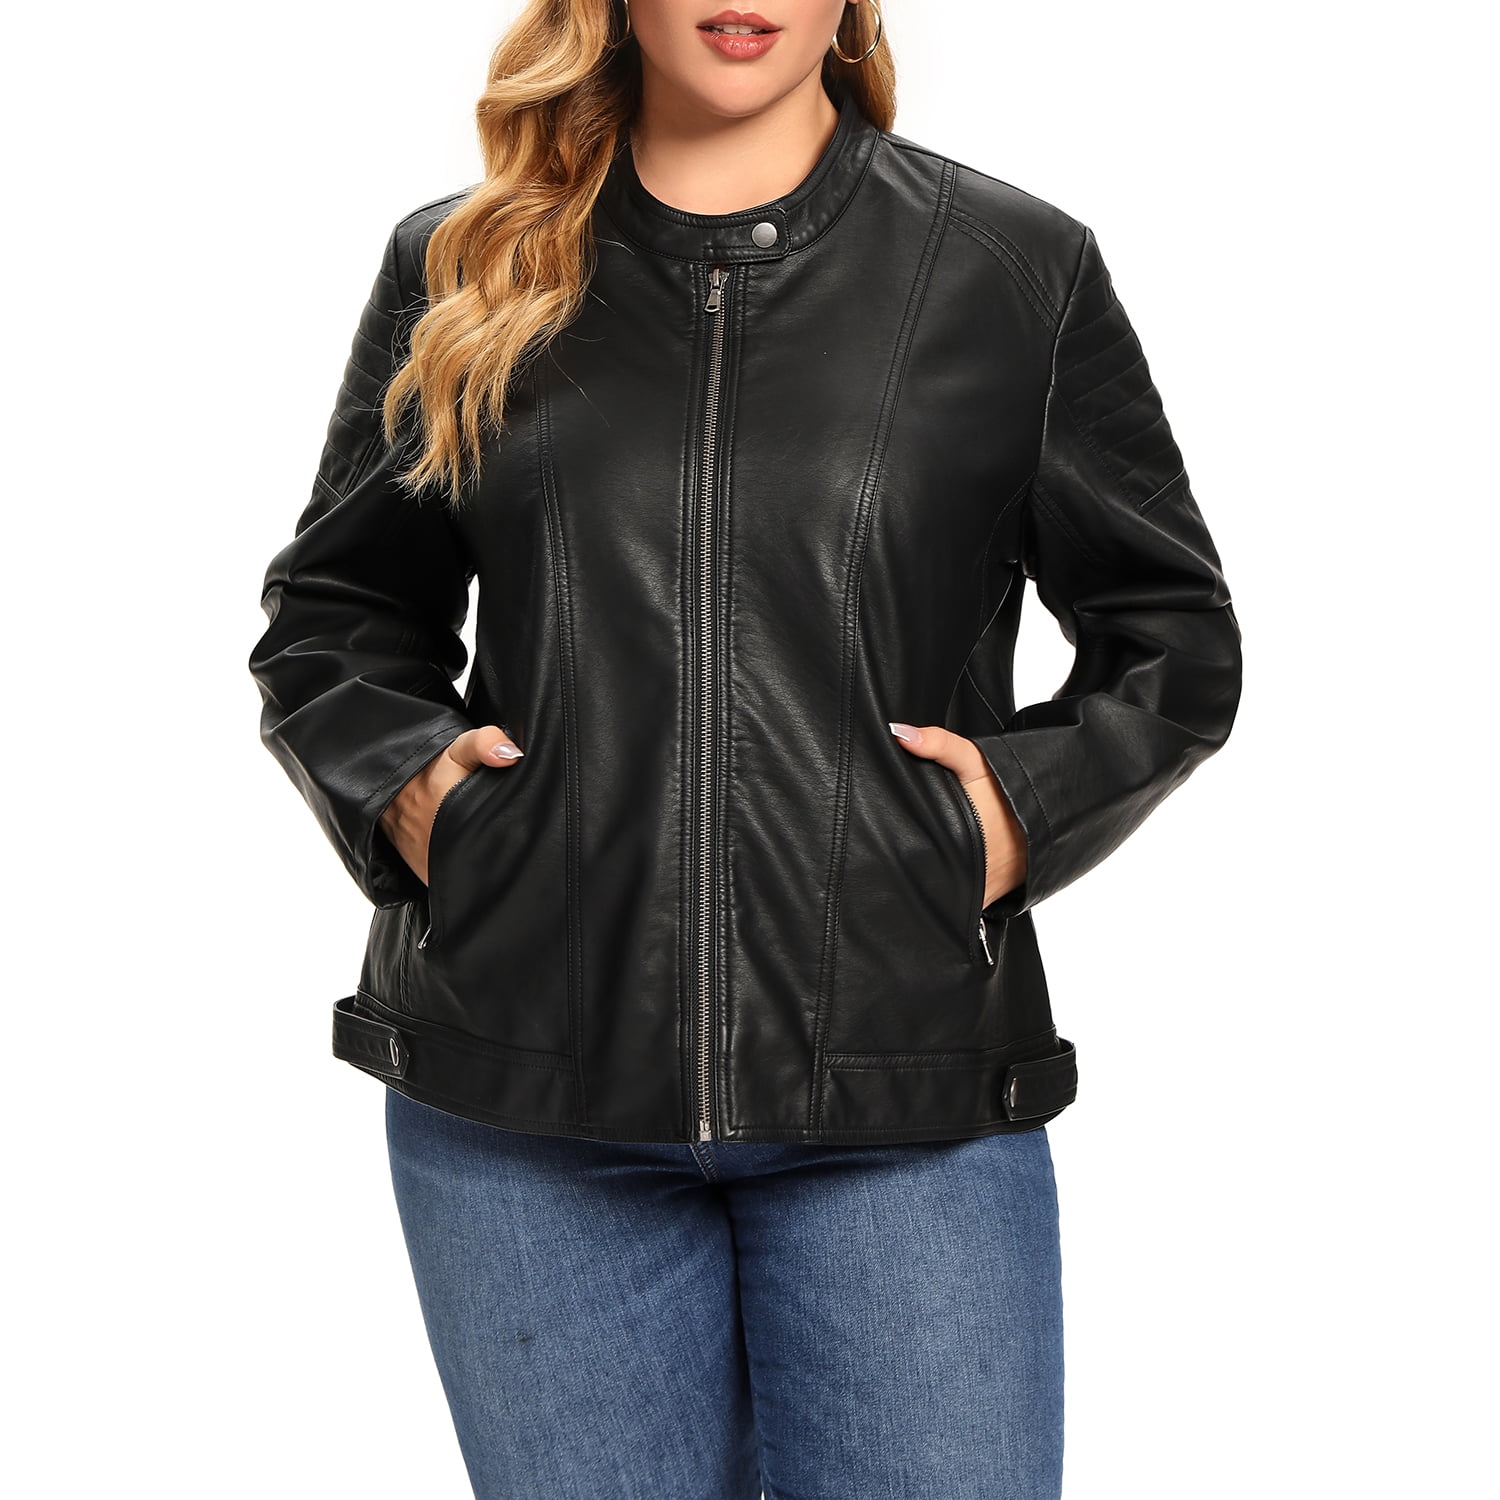 S P Y M Womens Faux Leather Jacket, Moto Biker Coat, Quilted Zip Up ...